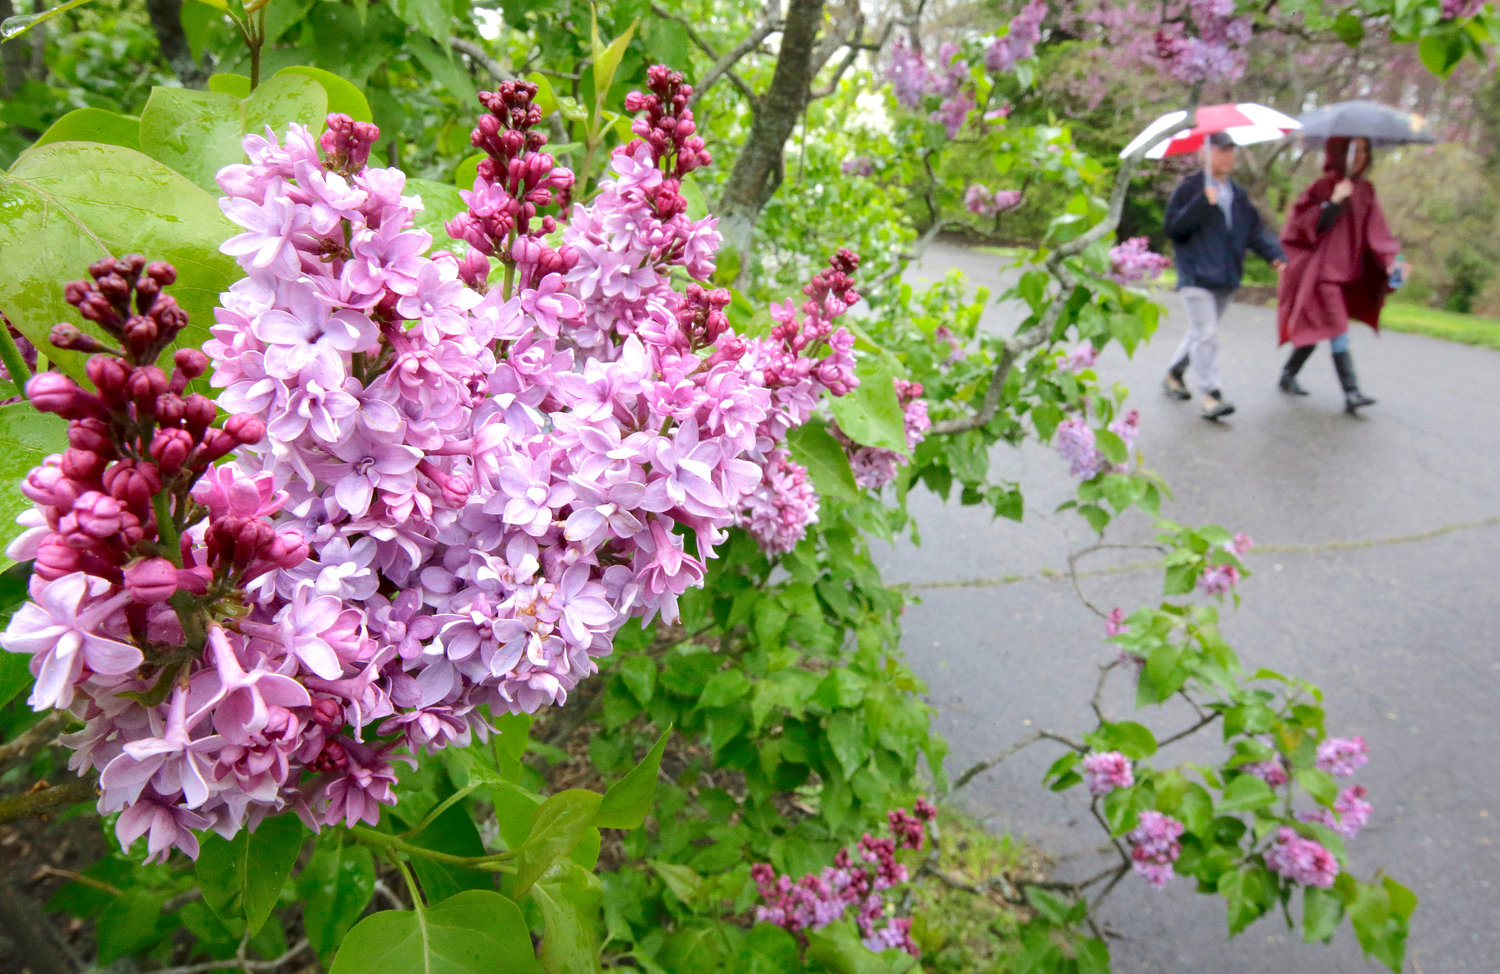 RELIABLE — Visitors use umbrellas as they walk past lilac blossoms during an event called “Lilac Sunday,” in the Arnold Arboretum, Sunday, May 8, 2016, in Boston. This shrub is fragrant, tough, and reliable; it’s also deer resistant.